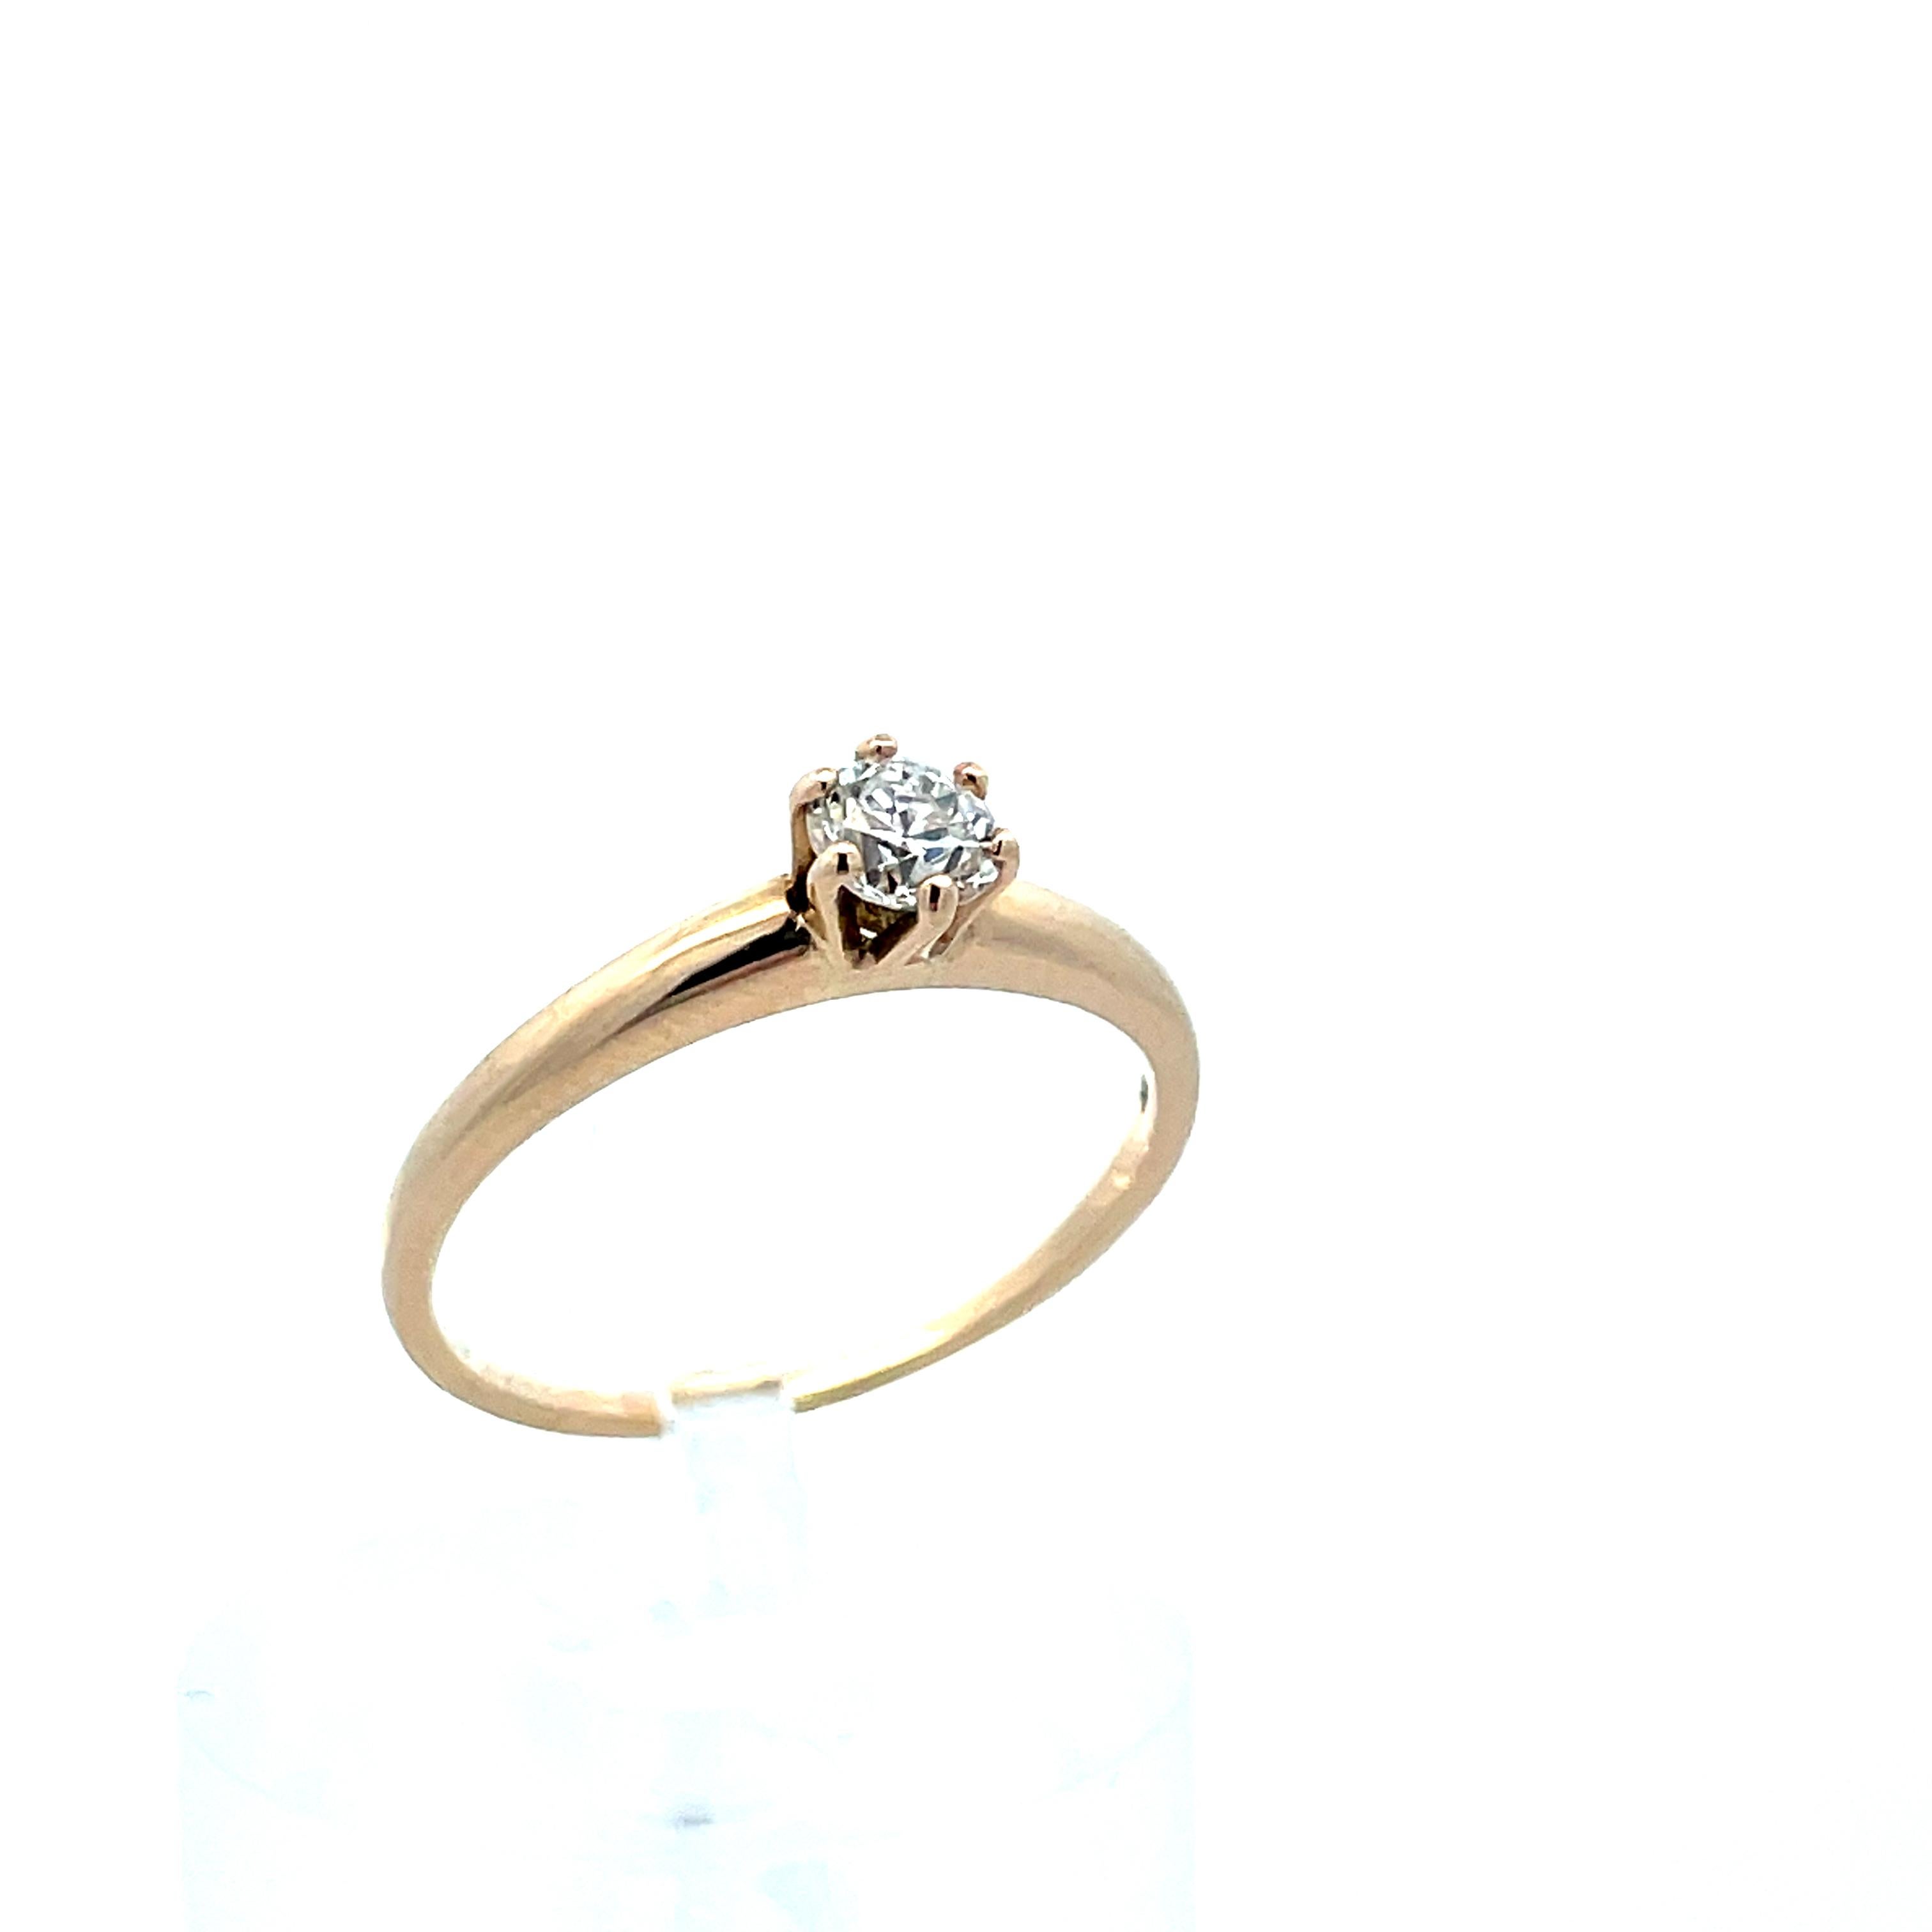 1910 Edwardian 14K Yellow Gold Diamond Solitaire Ring Signed Marshall Field  In Excellent Condition For Sale In Lexington, KY